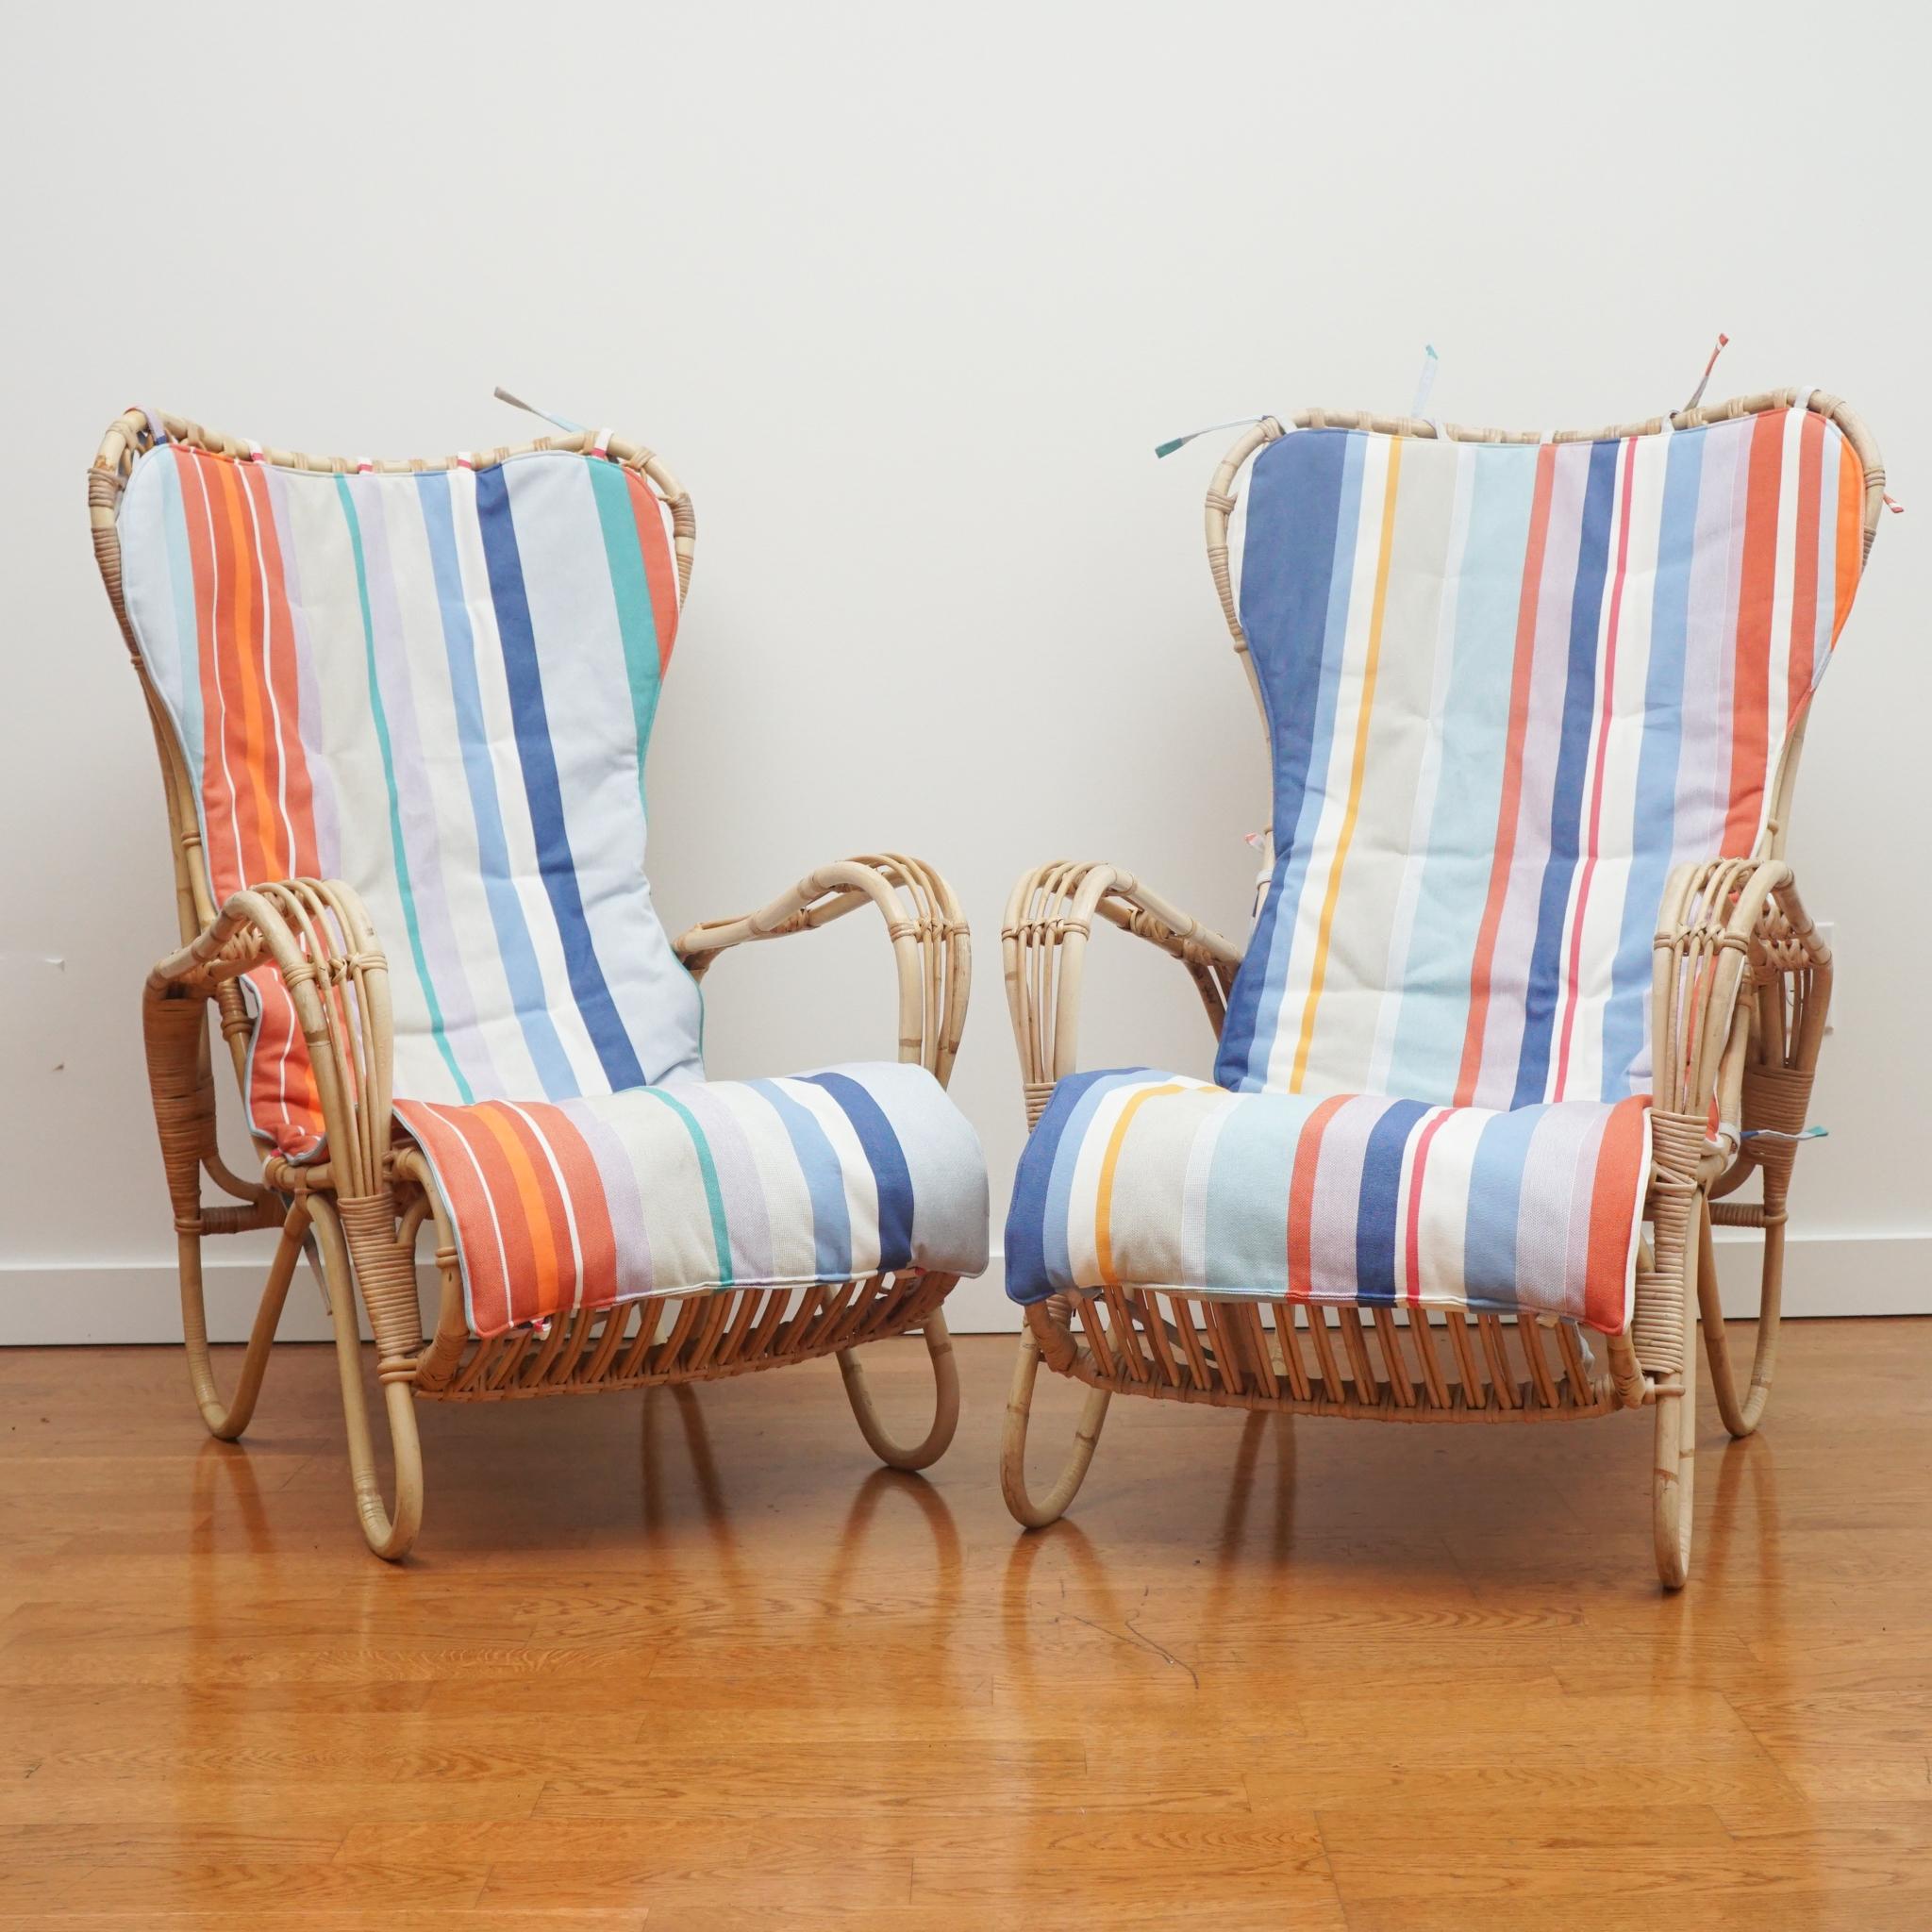 This pair of rattan lounge chairs are new arrivals from Sweden. Made in the 1950s both chairs are in remarkably good condition showing no major signs of wear, damage or repair. We did replace the original tie-on seat cushions with a summery stripe